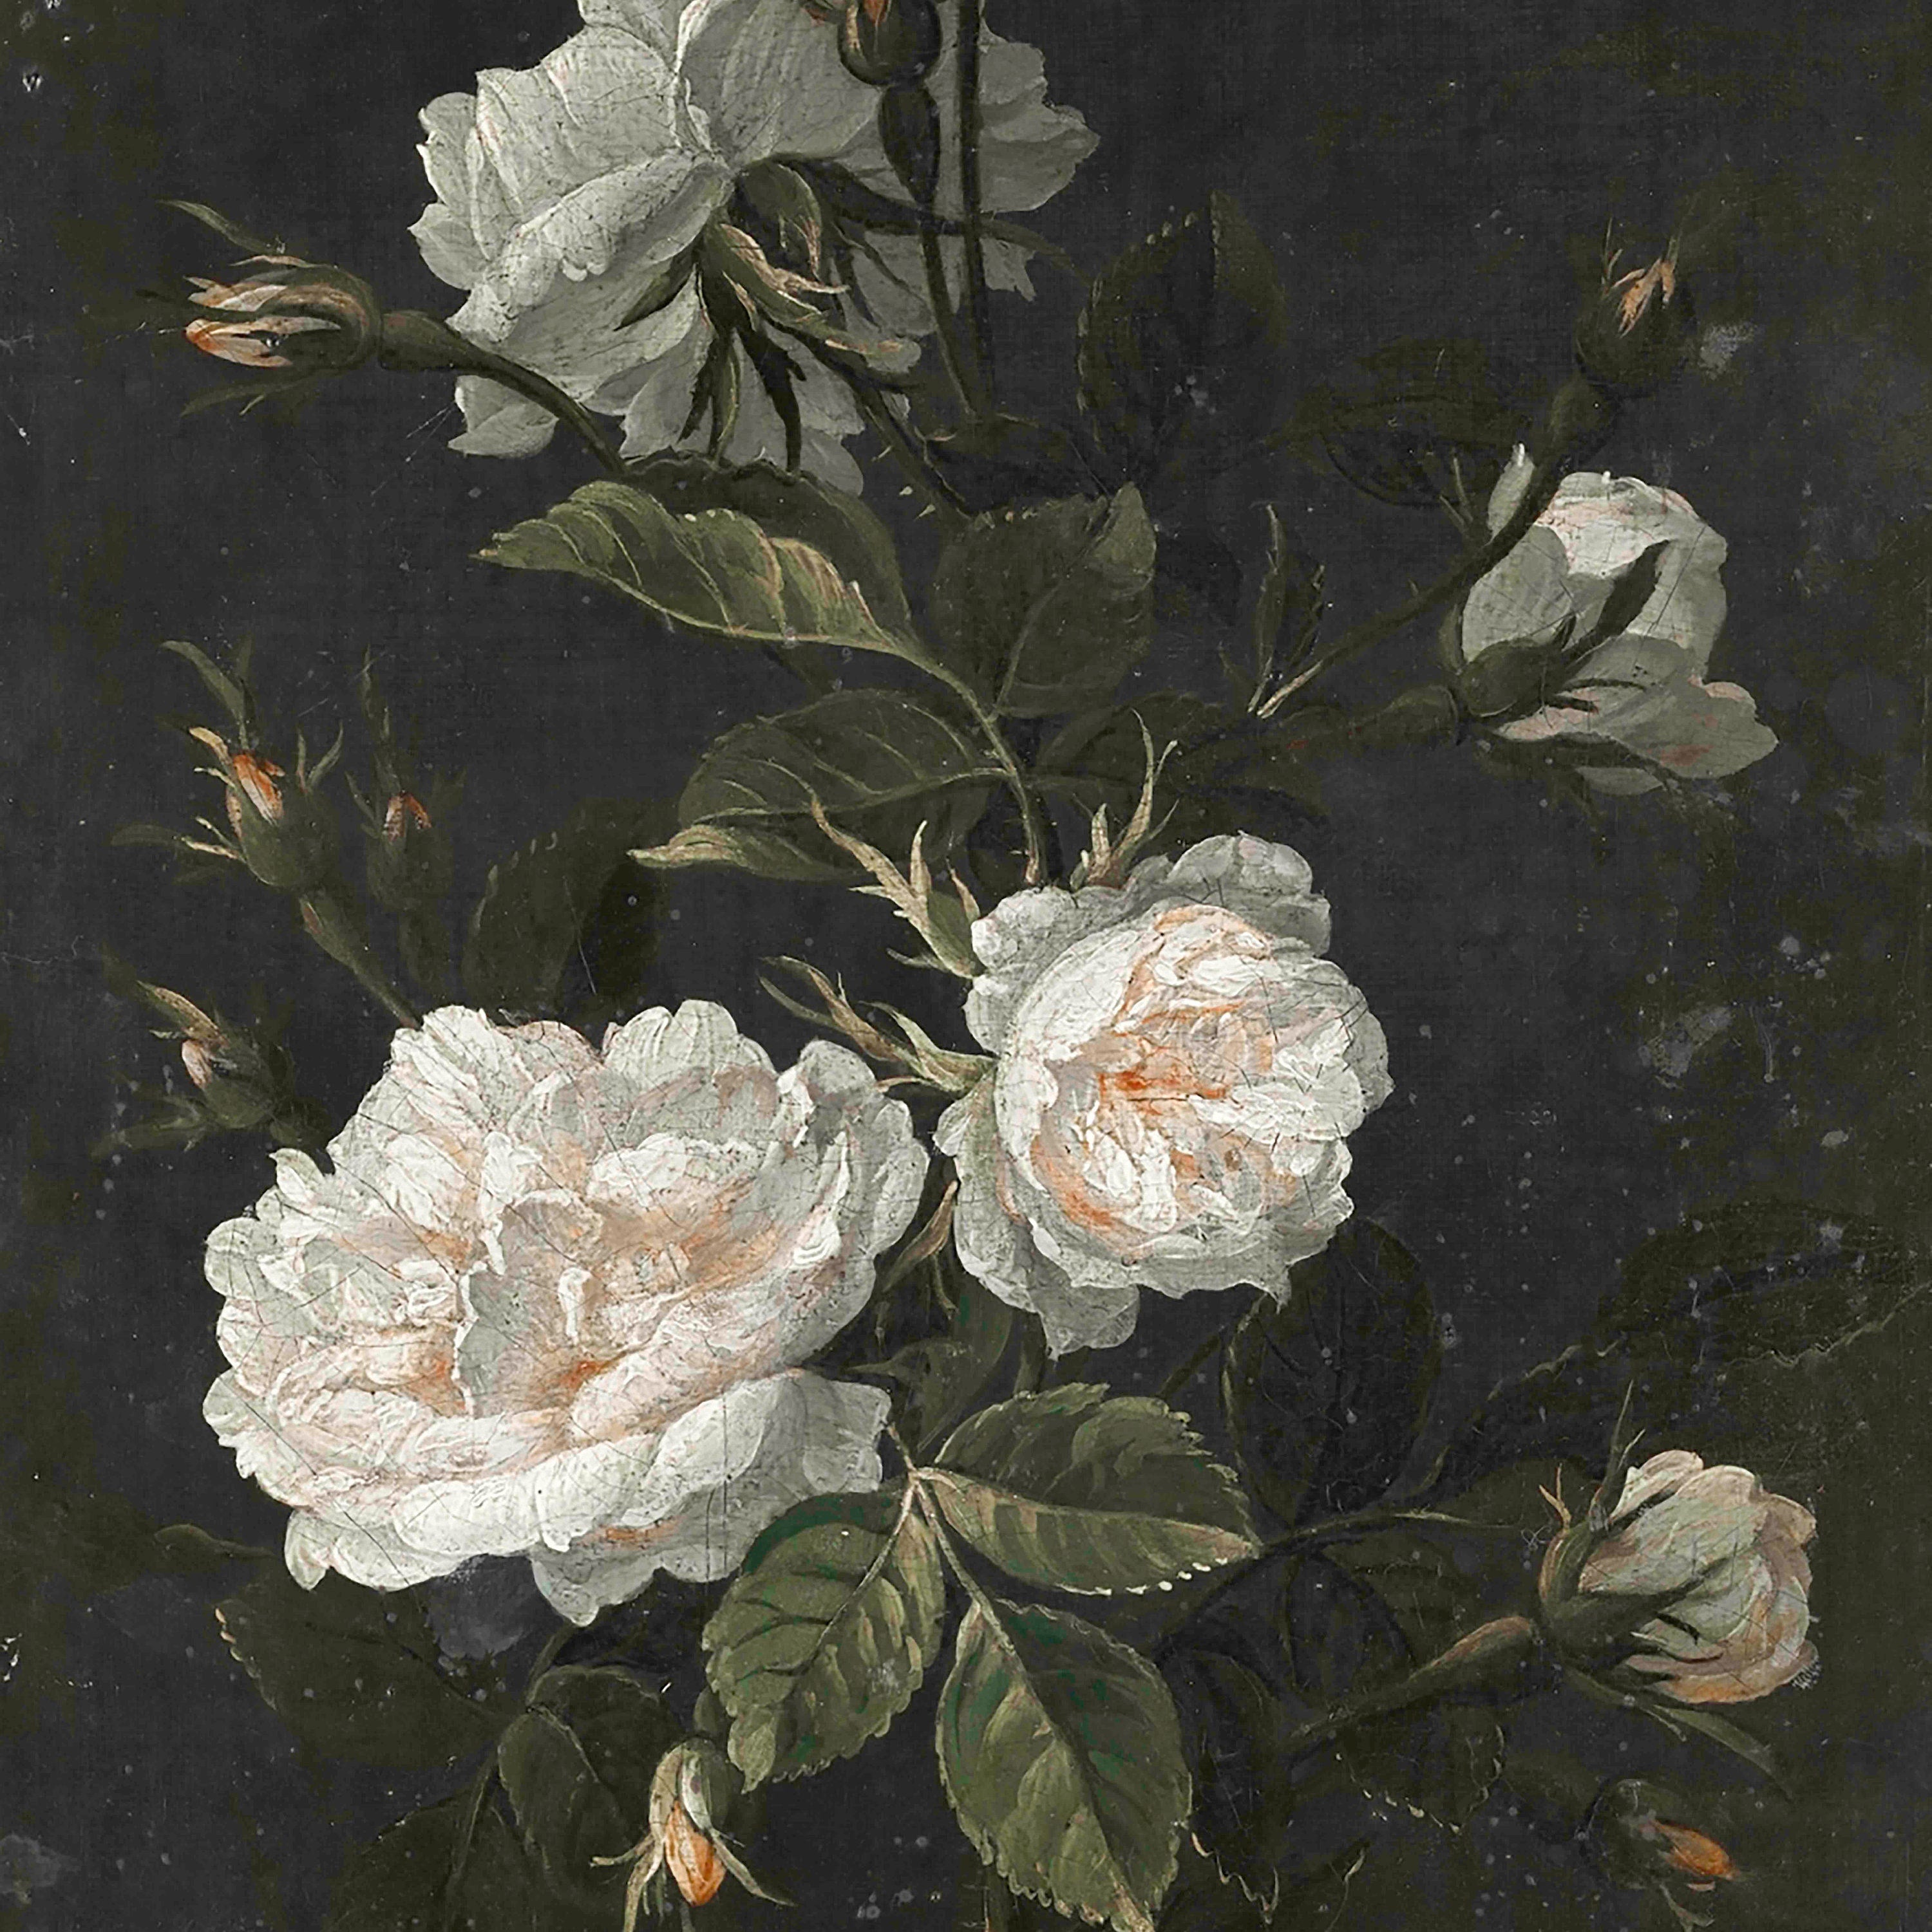 Still Life Roses was painted by the French artist Antoine Monnoyer during the 19th century